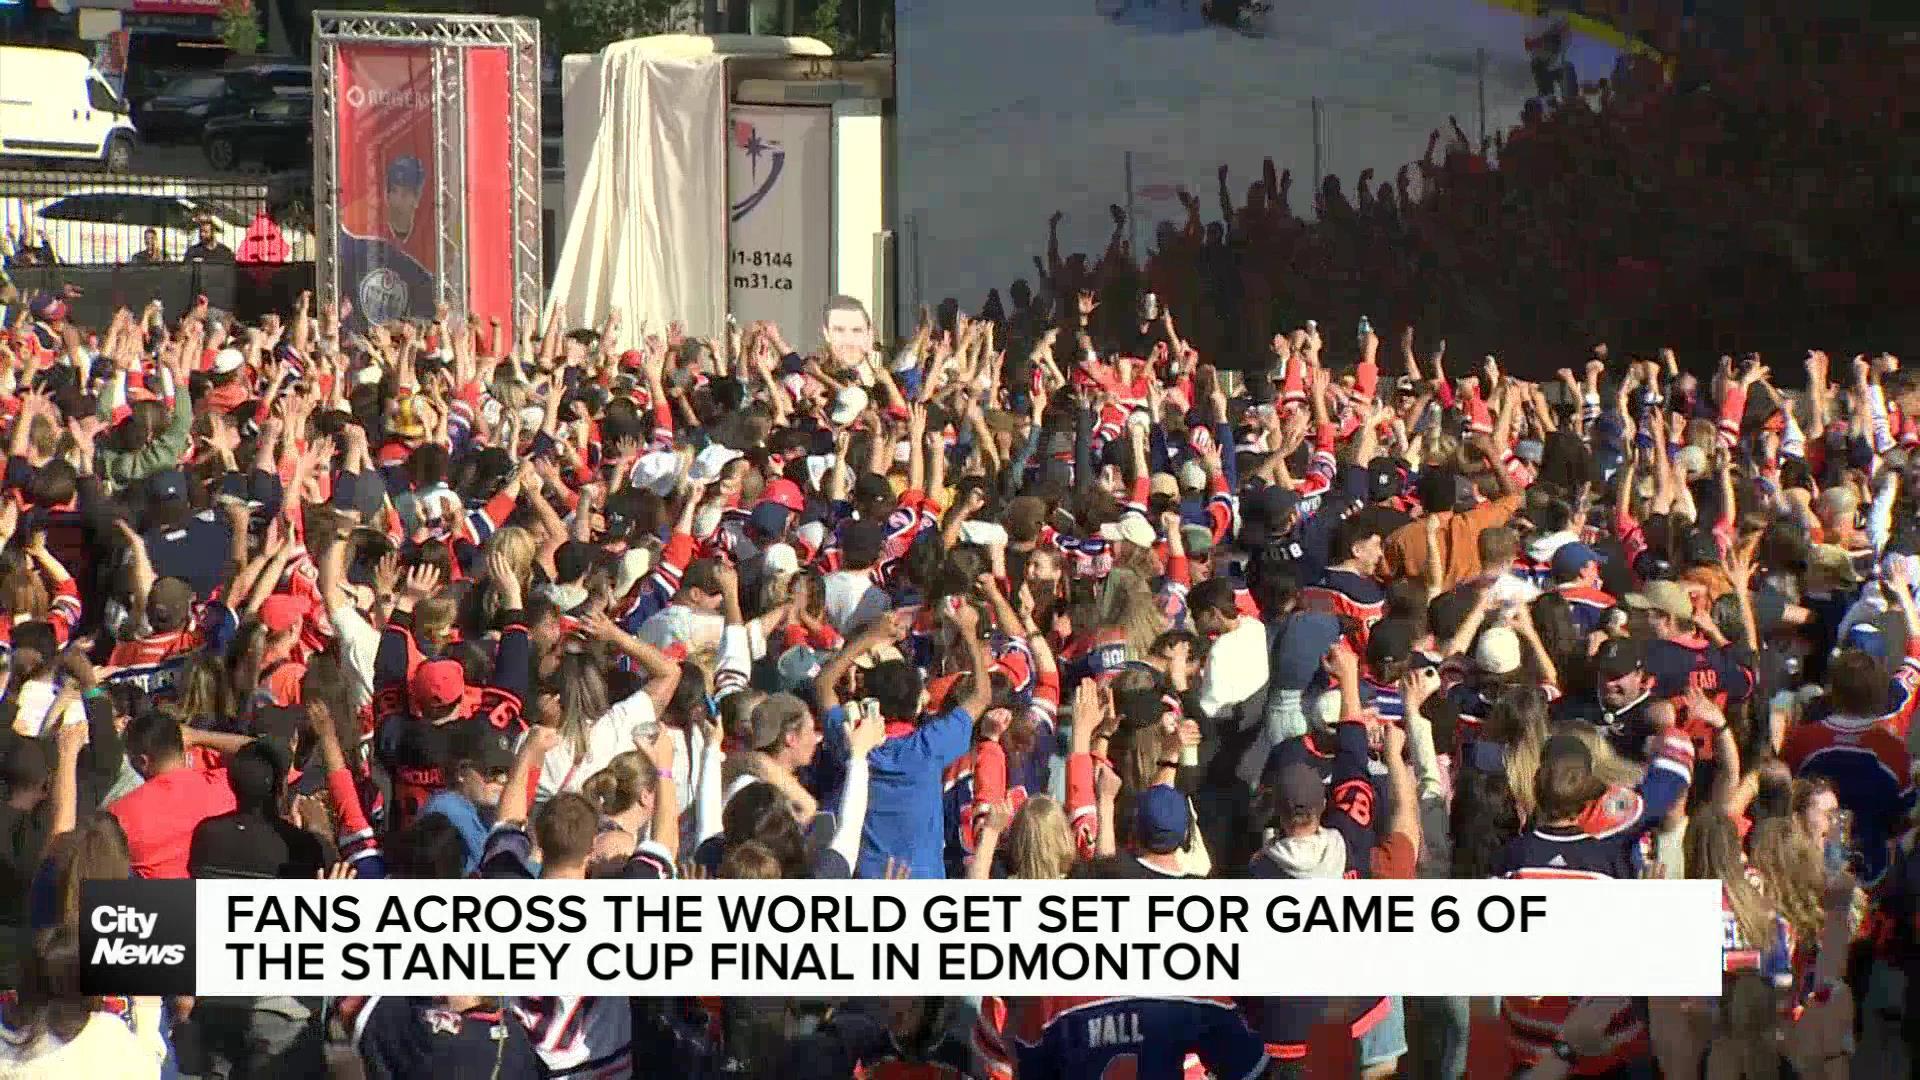 Hockey fans cheering on the Oilers in Edmonton and abroad